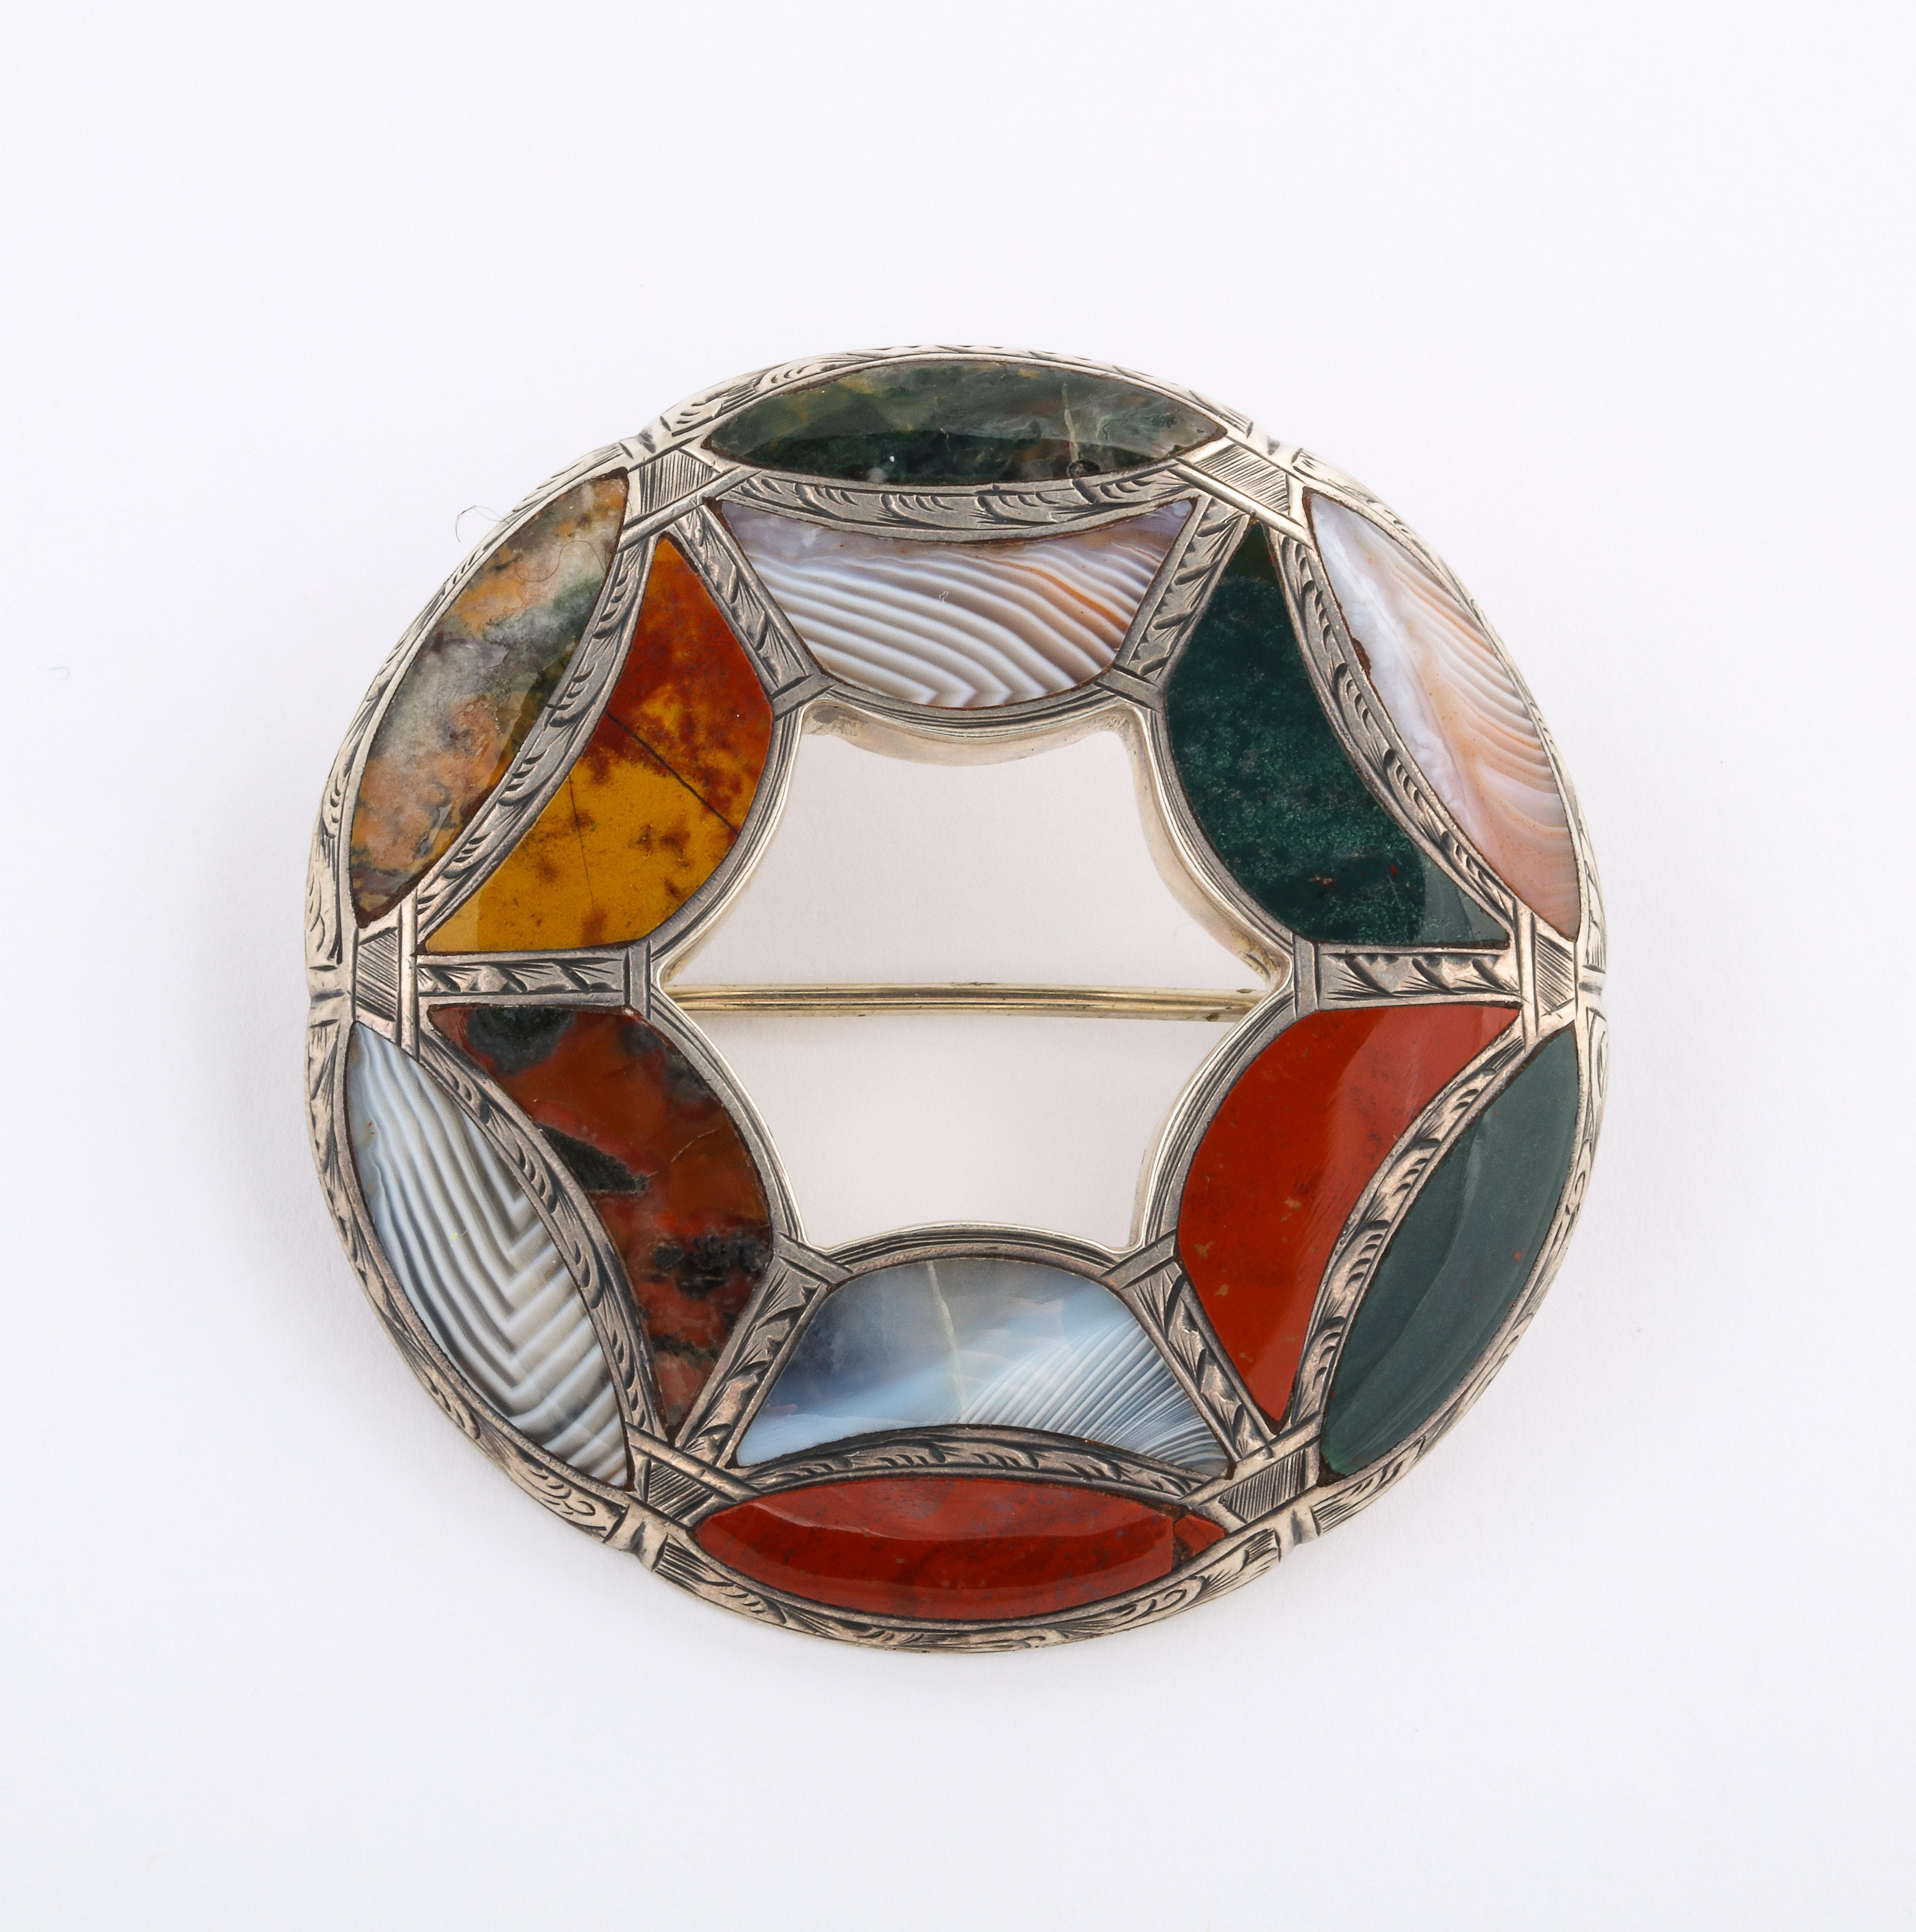 A Victorian Scottish agate brooch shows you the exceptional stone cutting and placing of various agates in sterling silver. The agates are a splendid show of rare agates including moss agate and Montrose striped agate cut in half moon pieces.